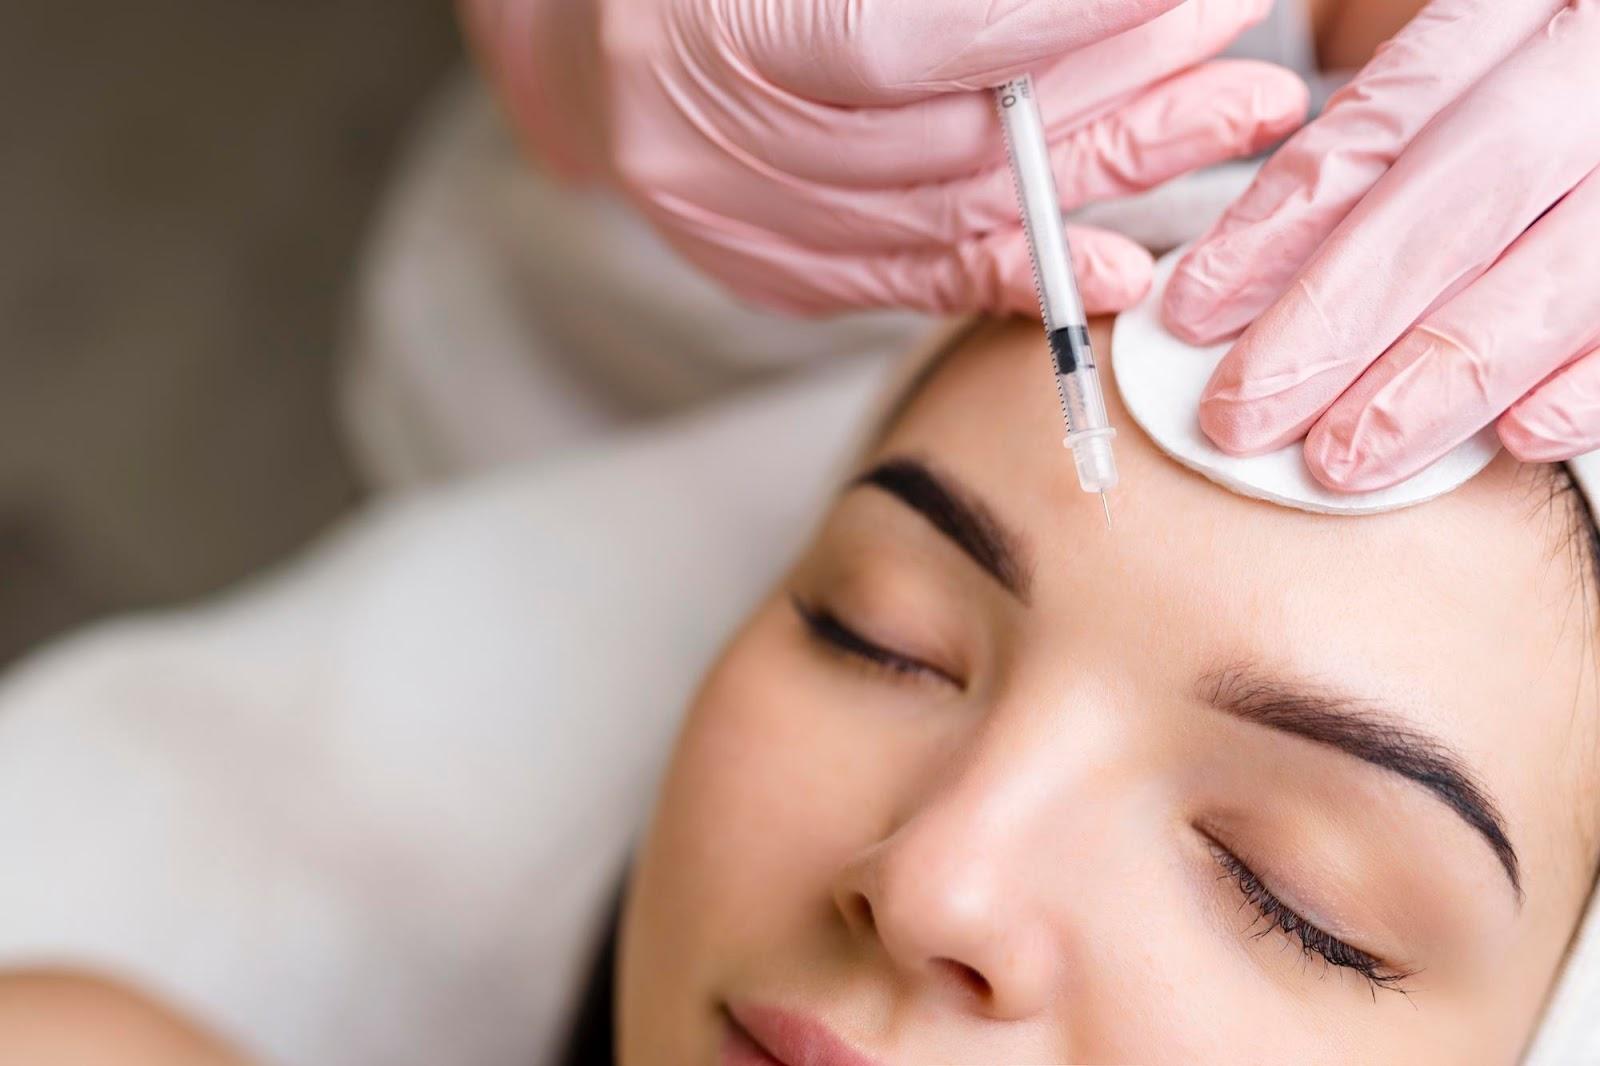 A woman in an aesthetic clinic receives Dysport injection to lift her eyebrows.